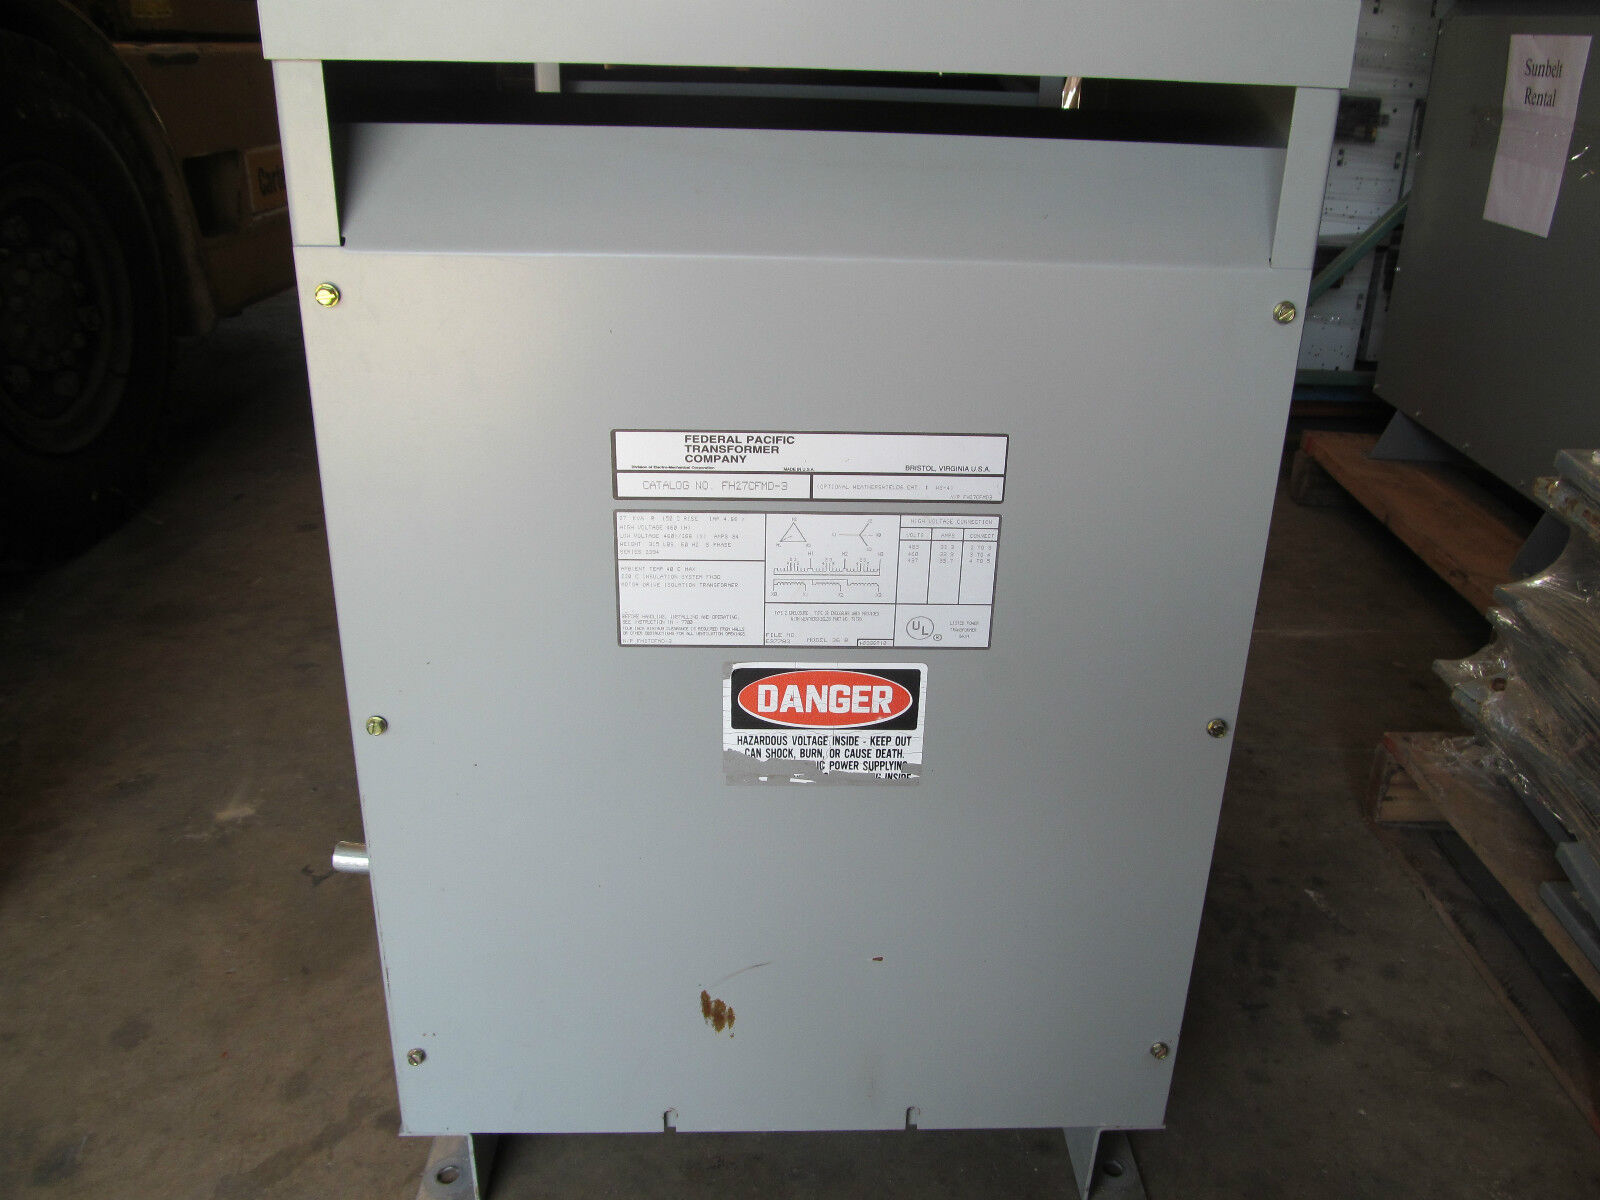 FPE Federal Pacific Transformer Co. FH27CFMD-3 27KVA Primary 460/Secondary 460Y/